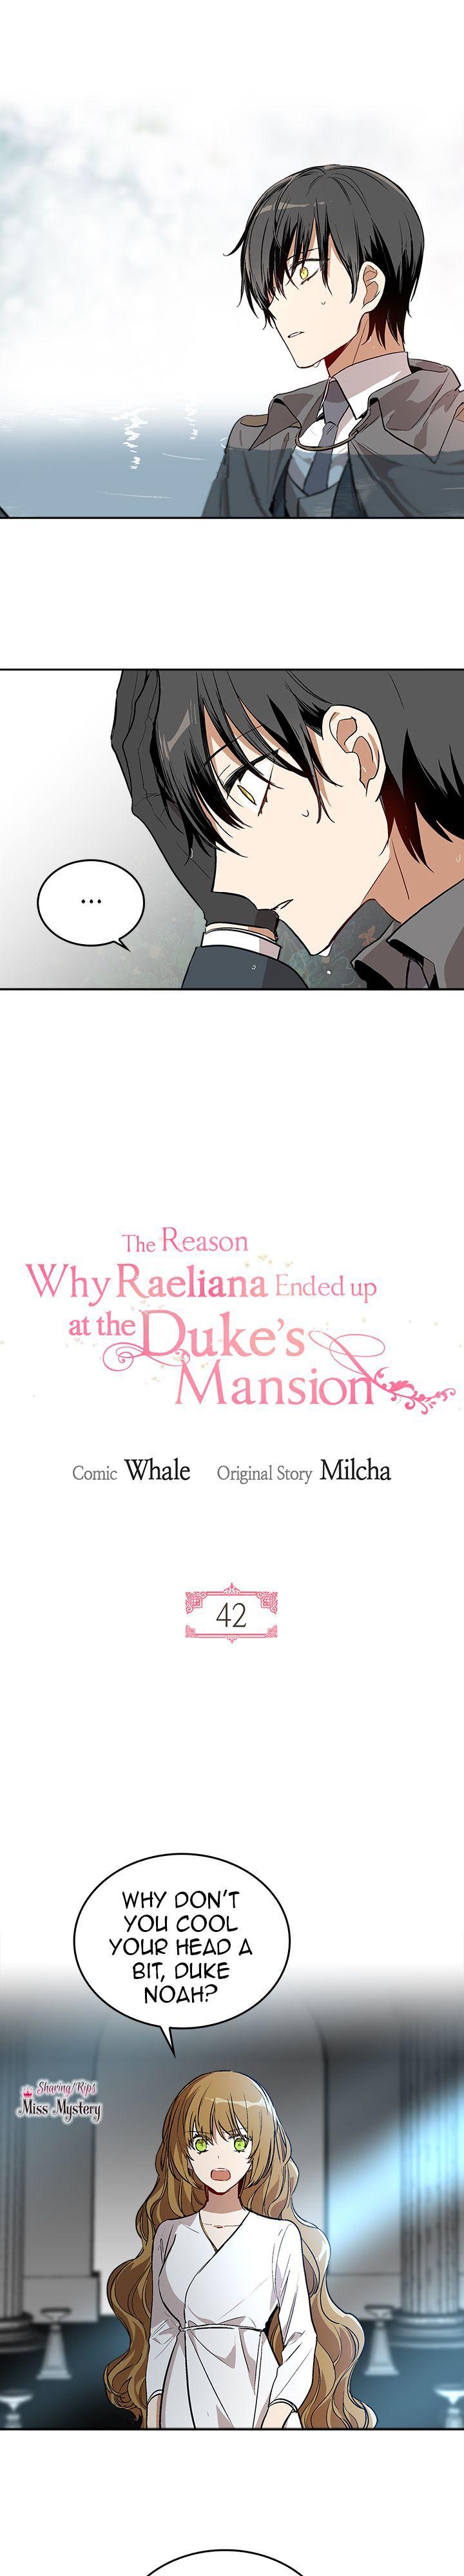 The Reason Why Raeliana Ended up at the Duke’s Mansion - Chapter 42 Page 1